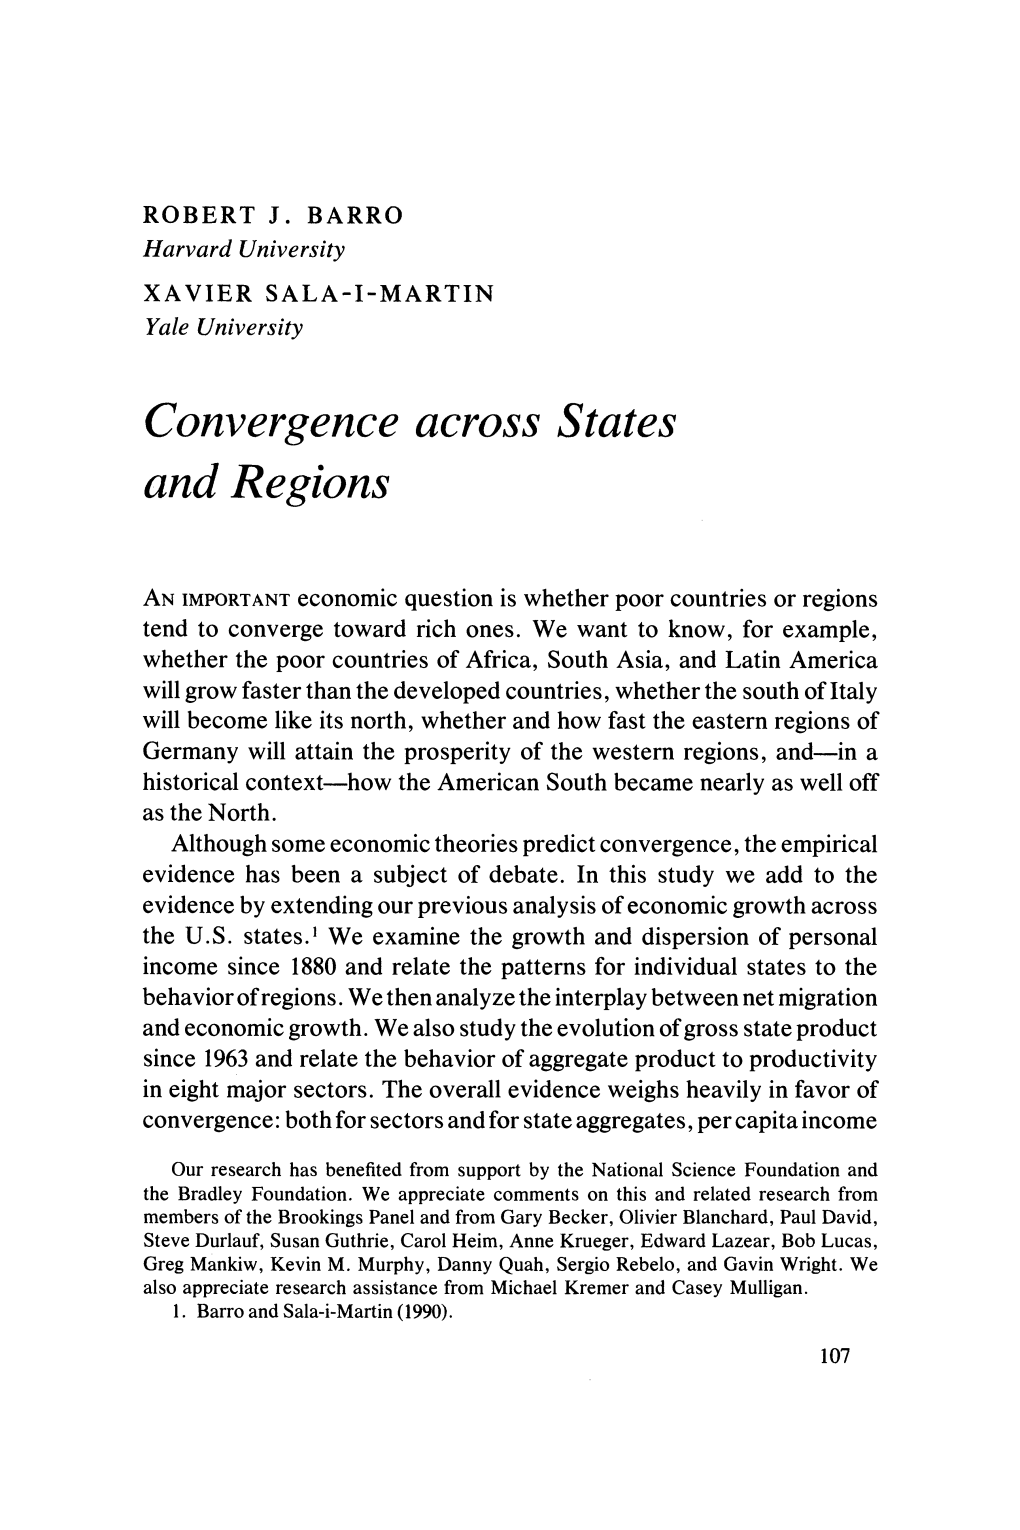 Convergence Across States and Regions